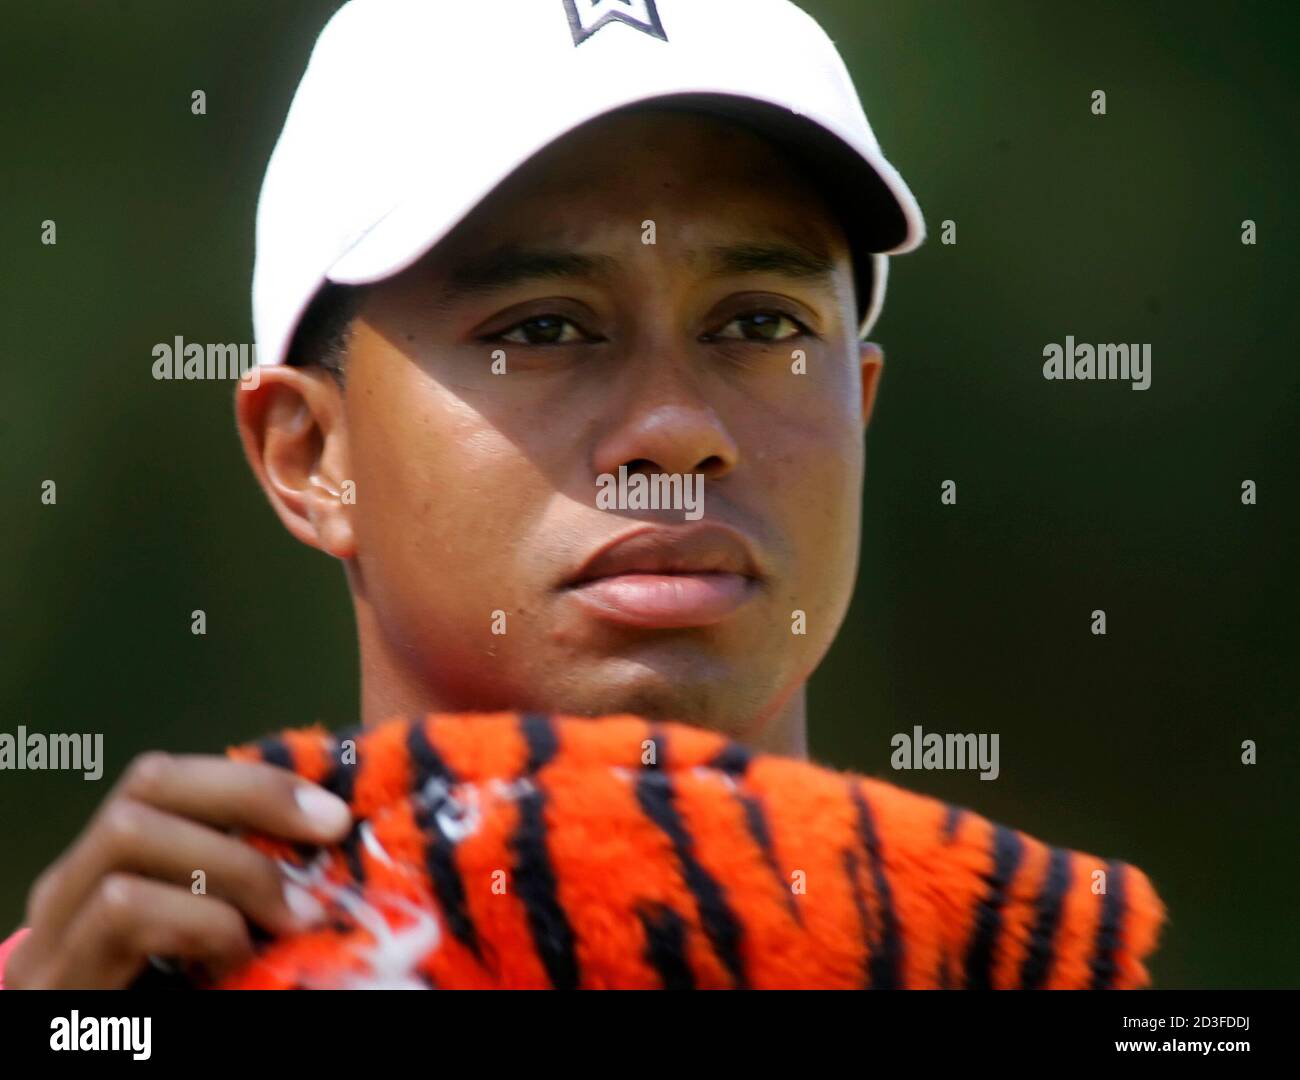 Tiger Golf Head Cover High Resolution Stock Photography and Images - Alamy